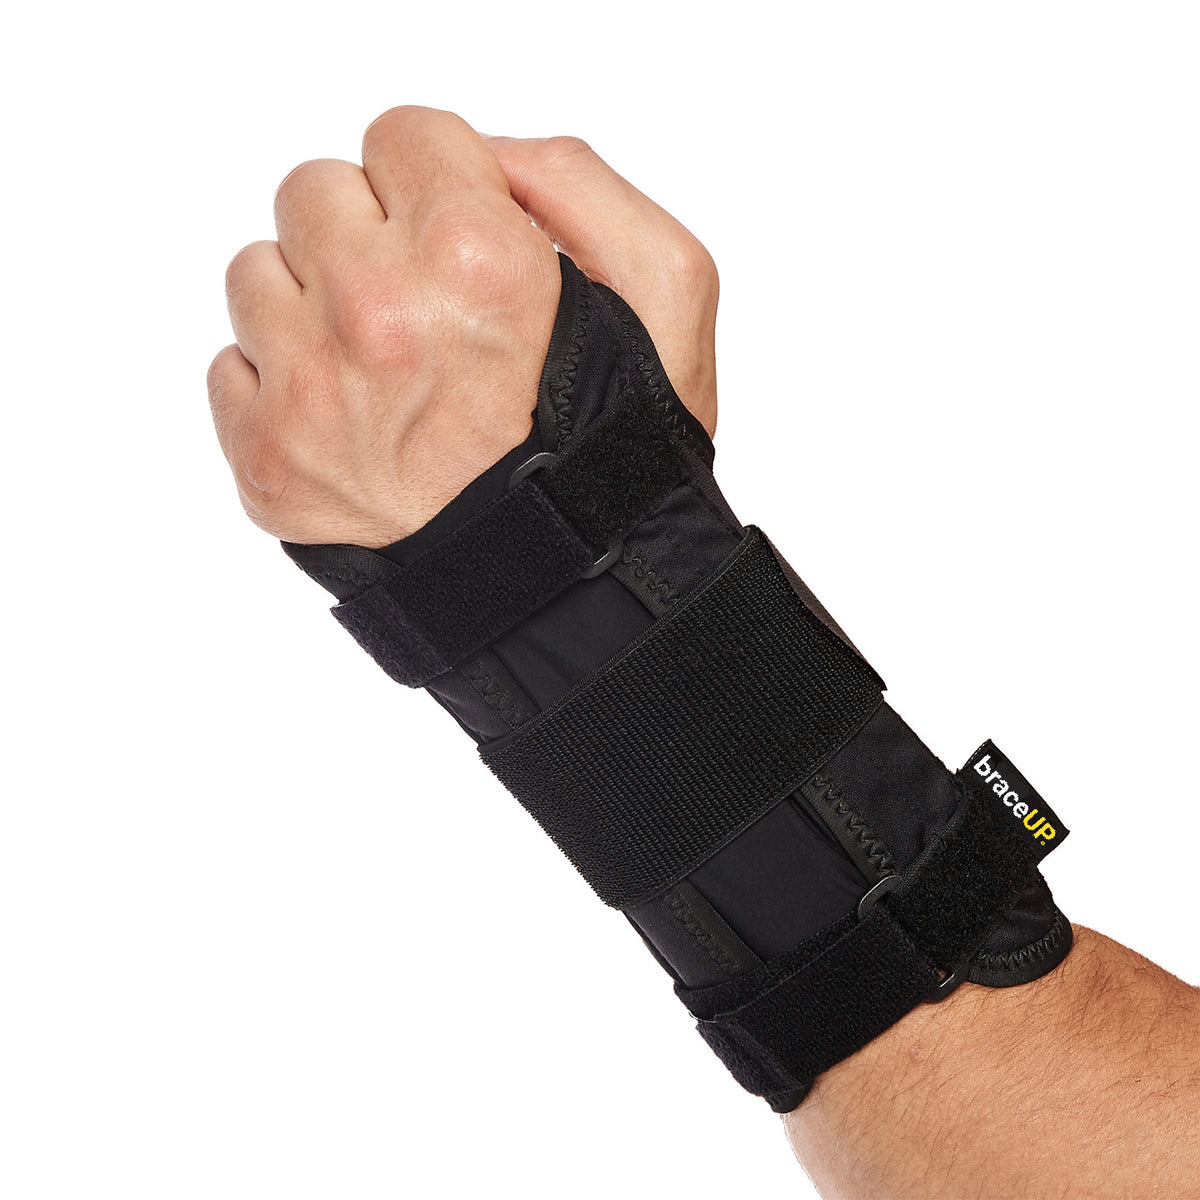 Wrist Braces for Carpal Tunnel Syndrome